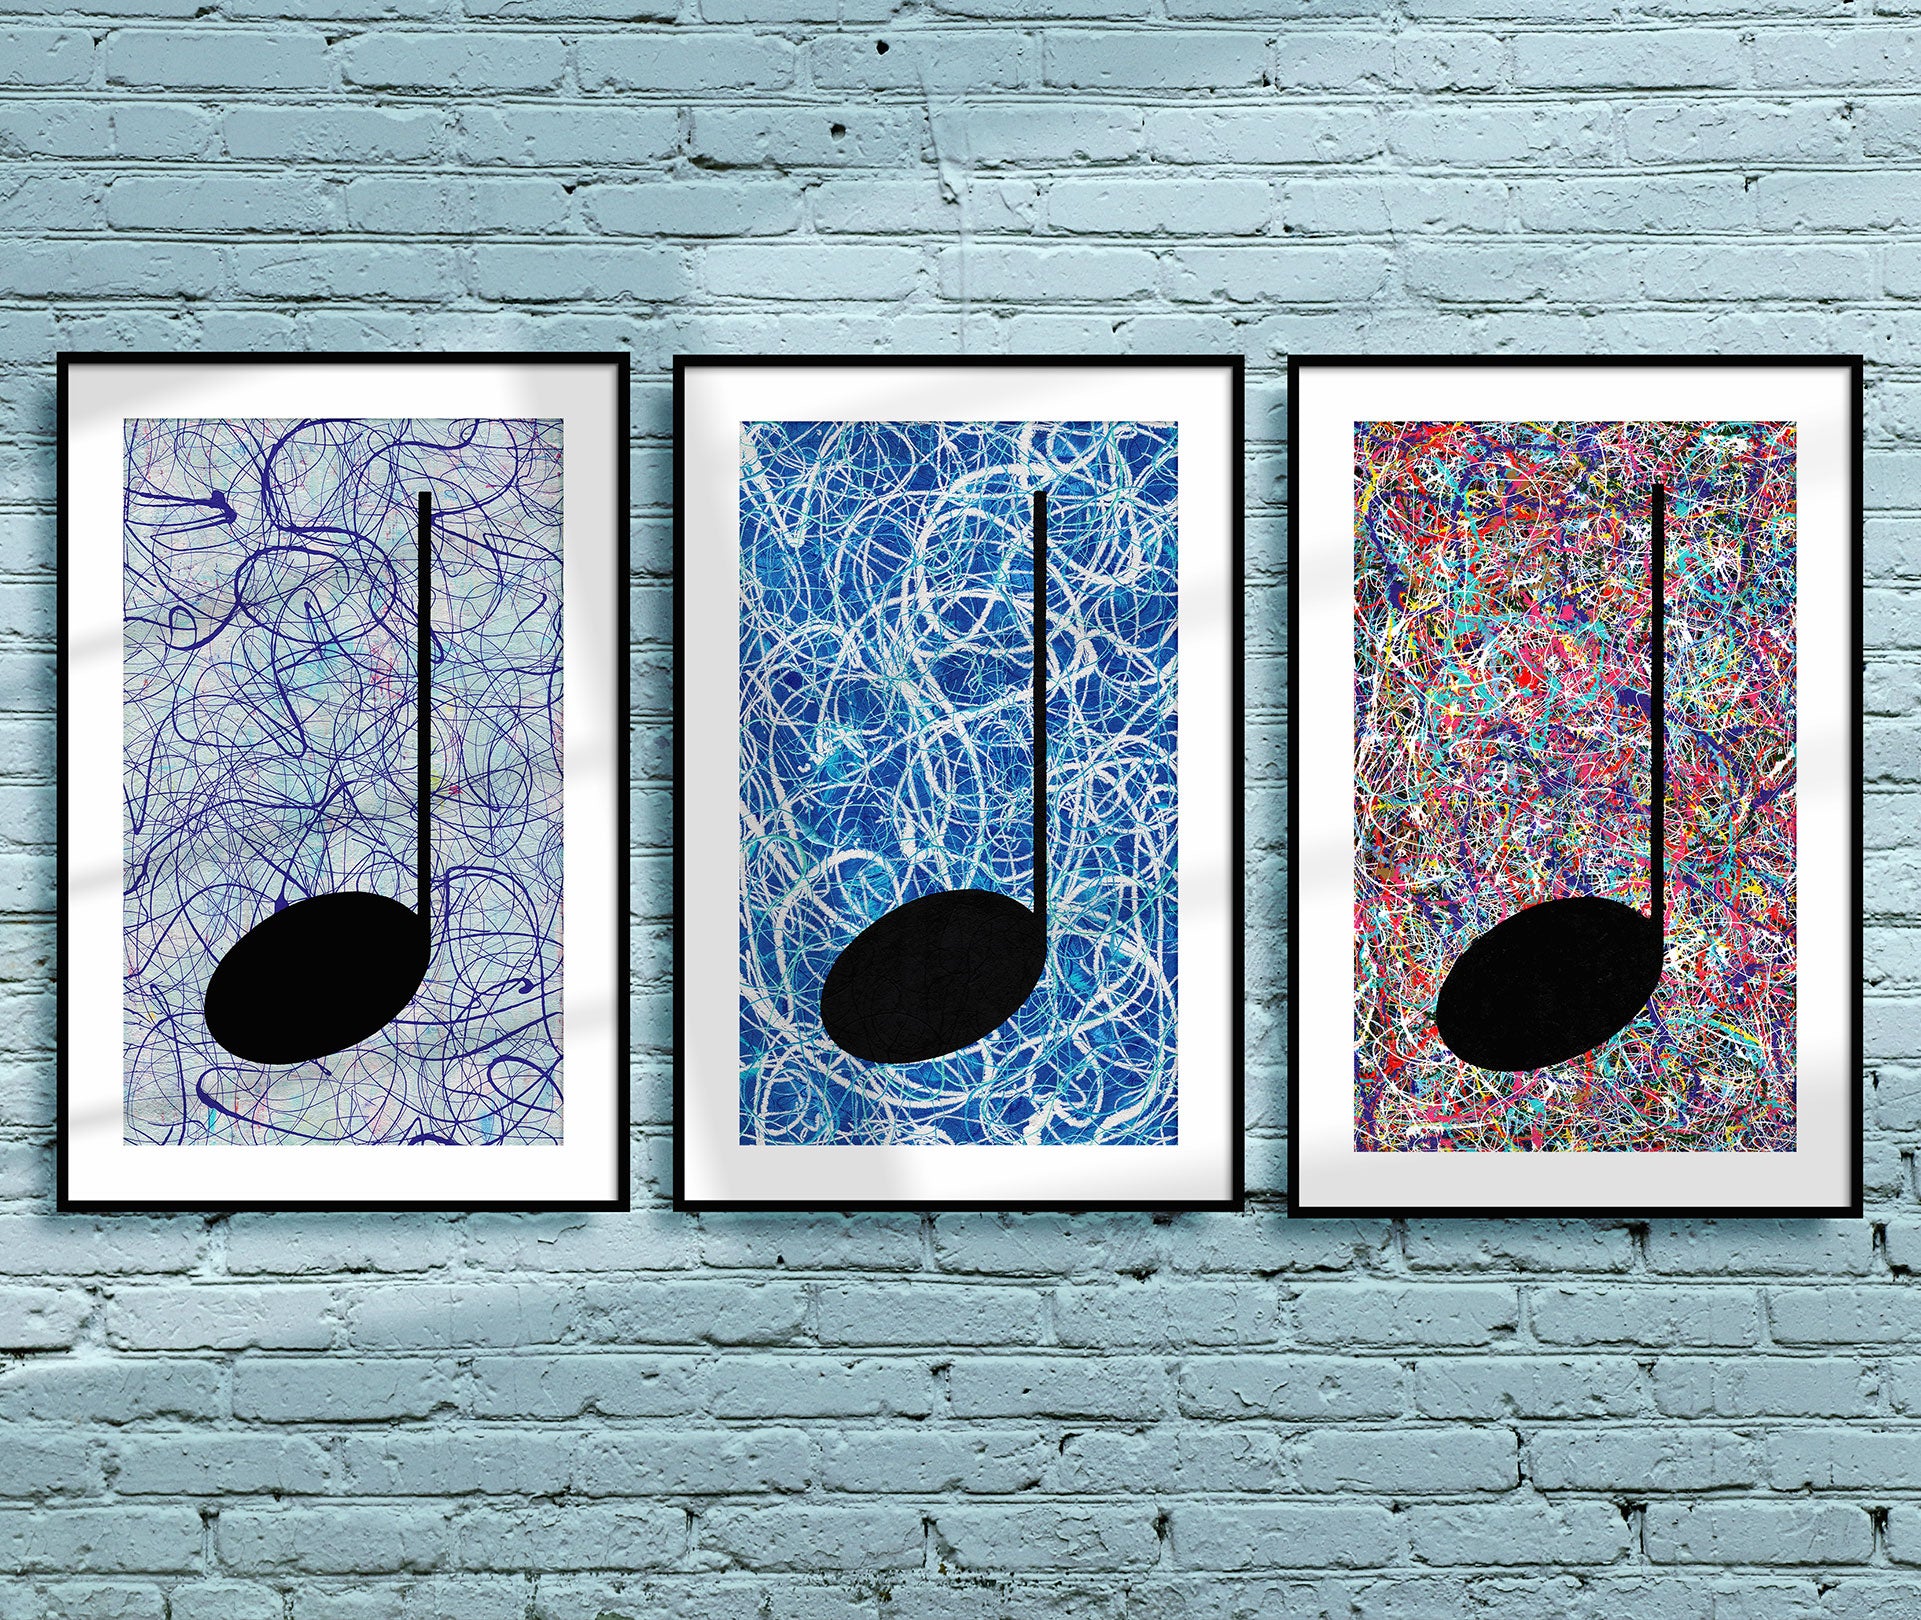 Three Music Art Prints, Framed and hanging on a light blue brick wall